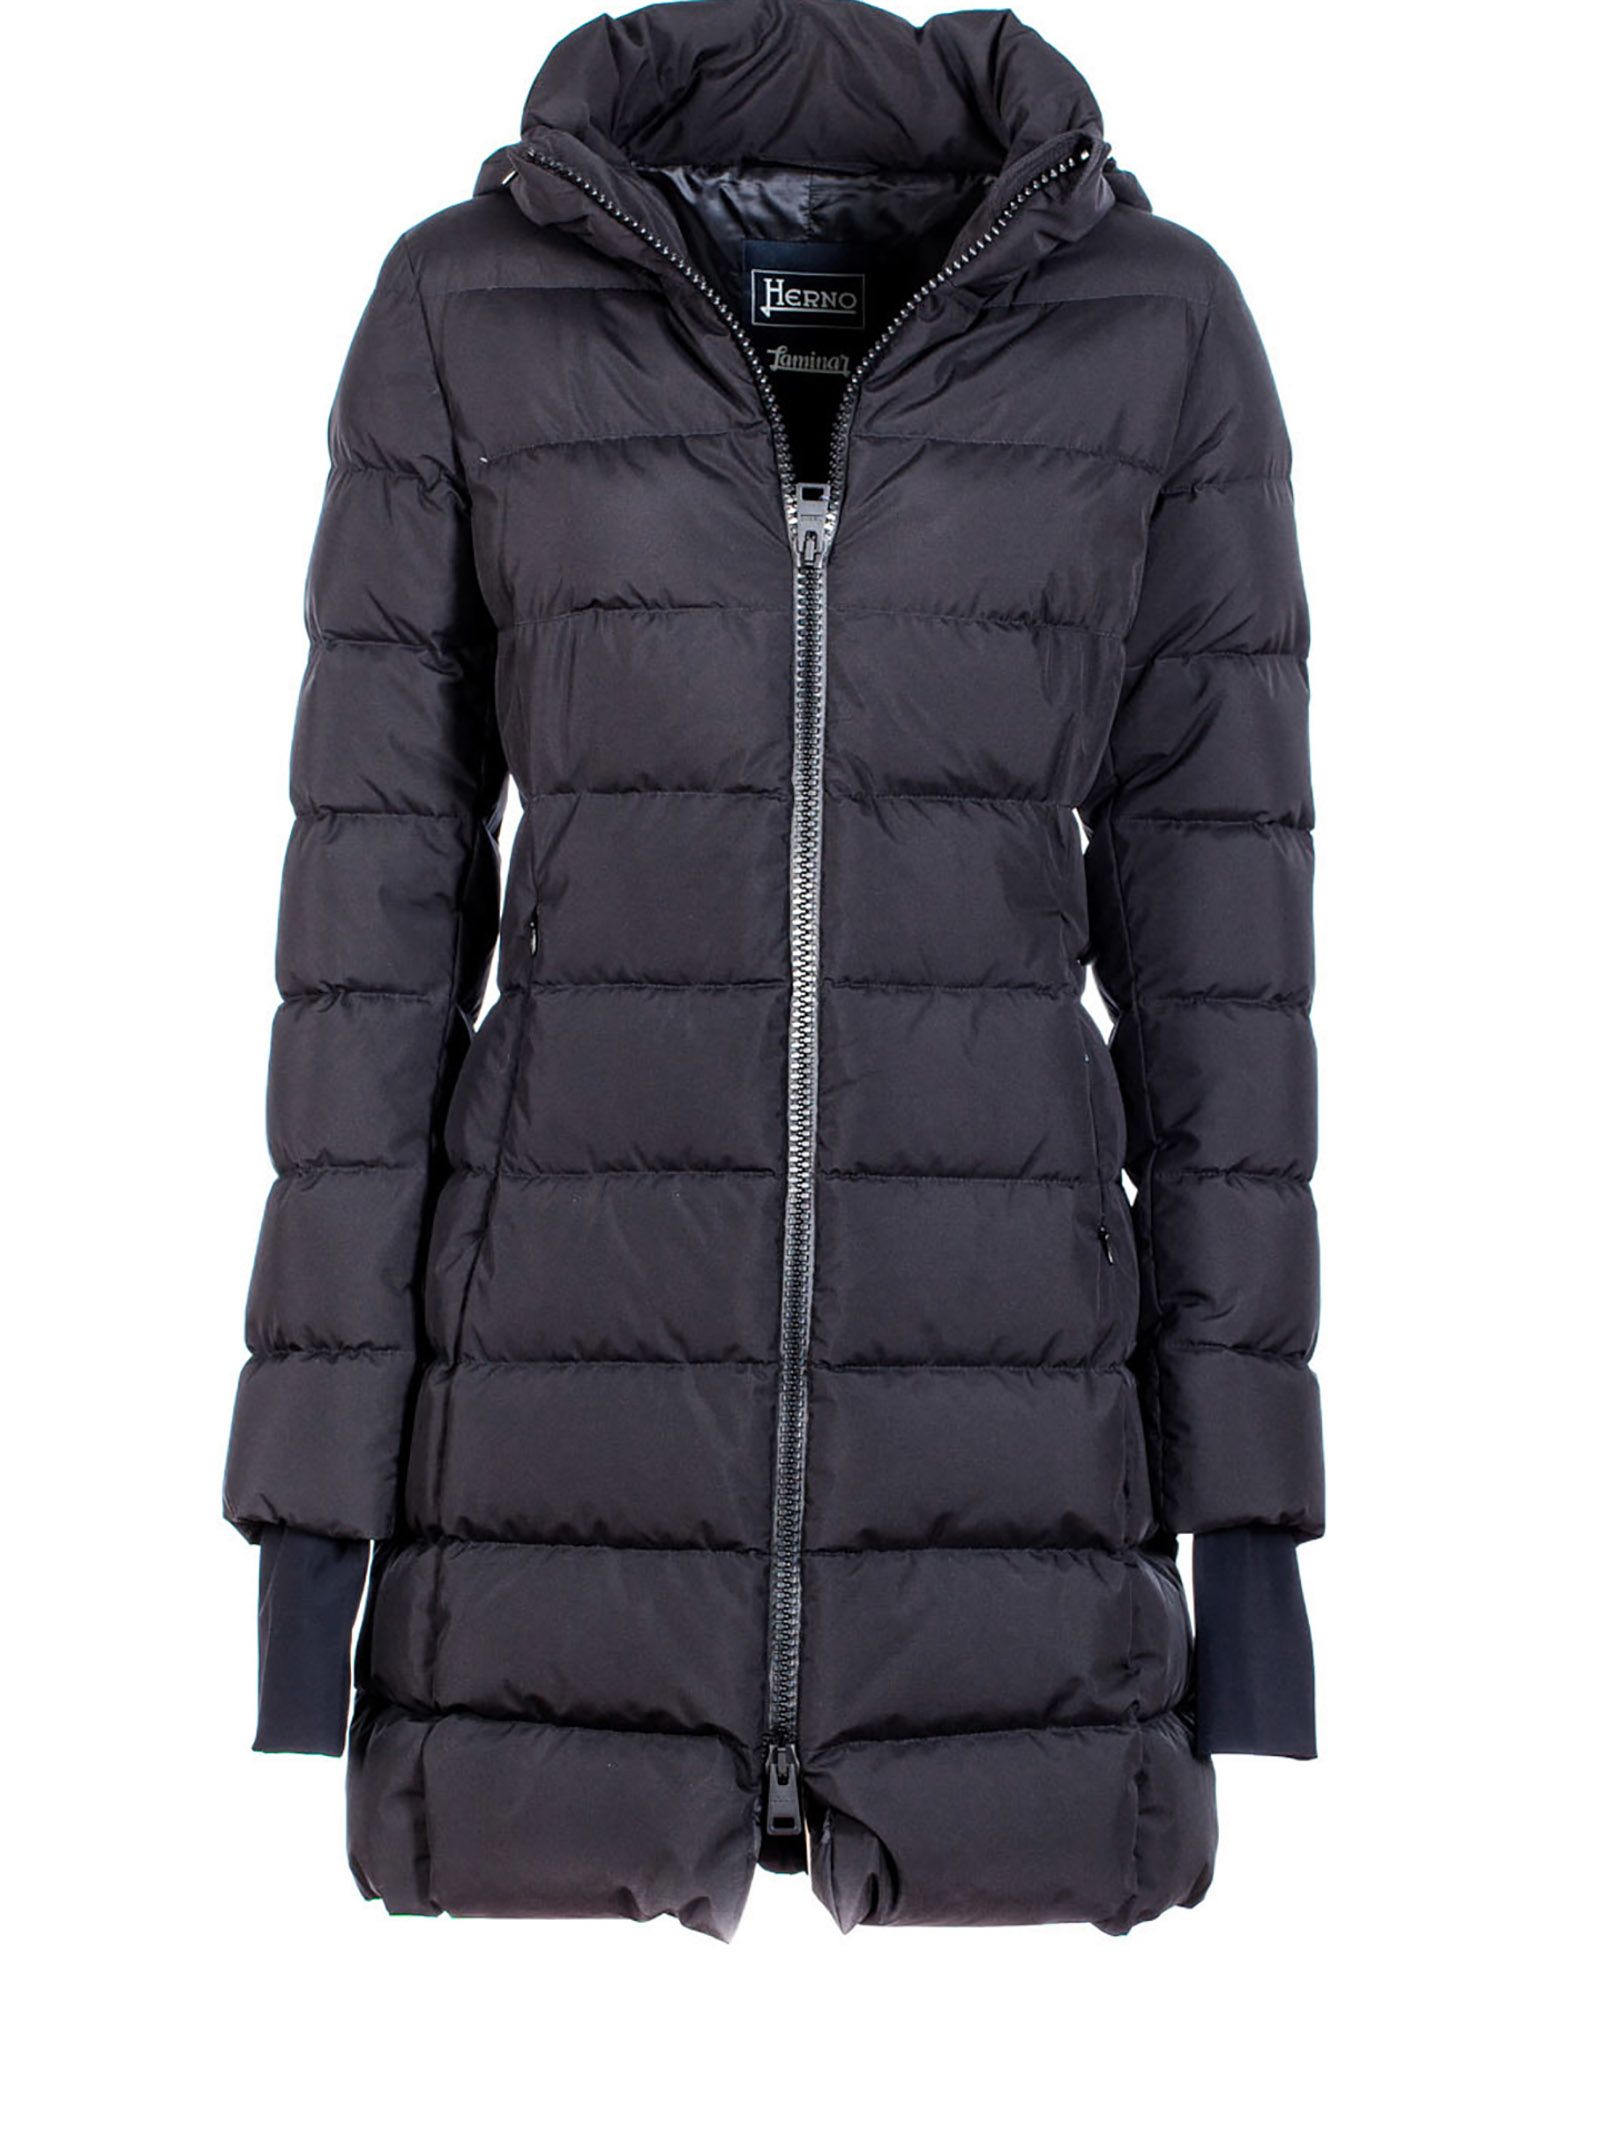 Herno Herno Quilted Long Down Jacket - Black - 8426546 | italist